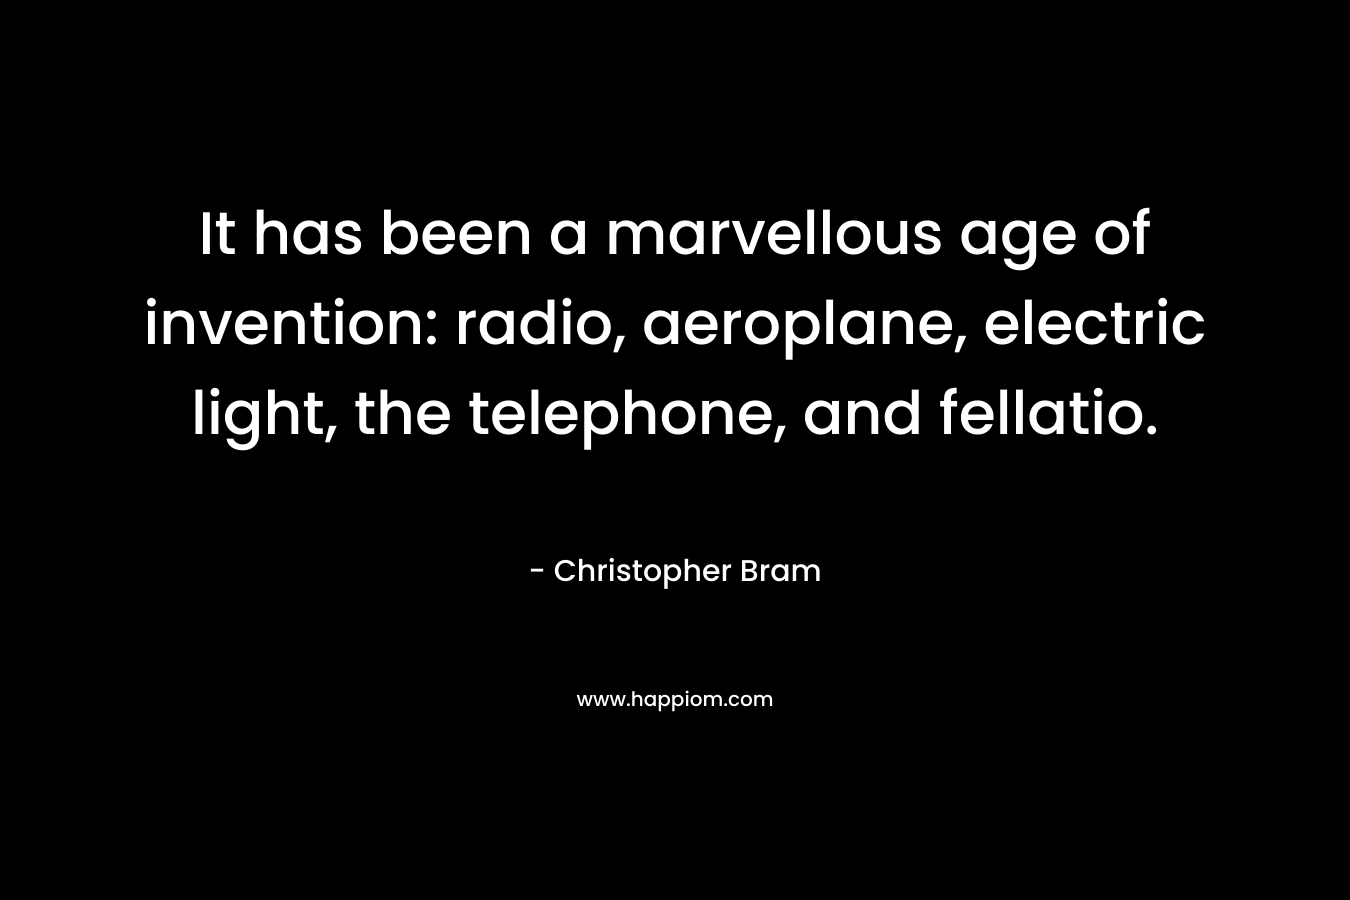 It has been a marvellous age of invention: radio, aeroplane, electric light, the telephone, and fellatio. – Christopher Bram